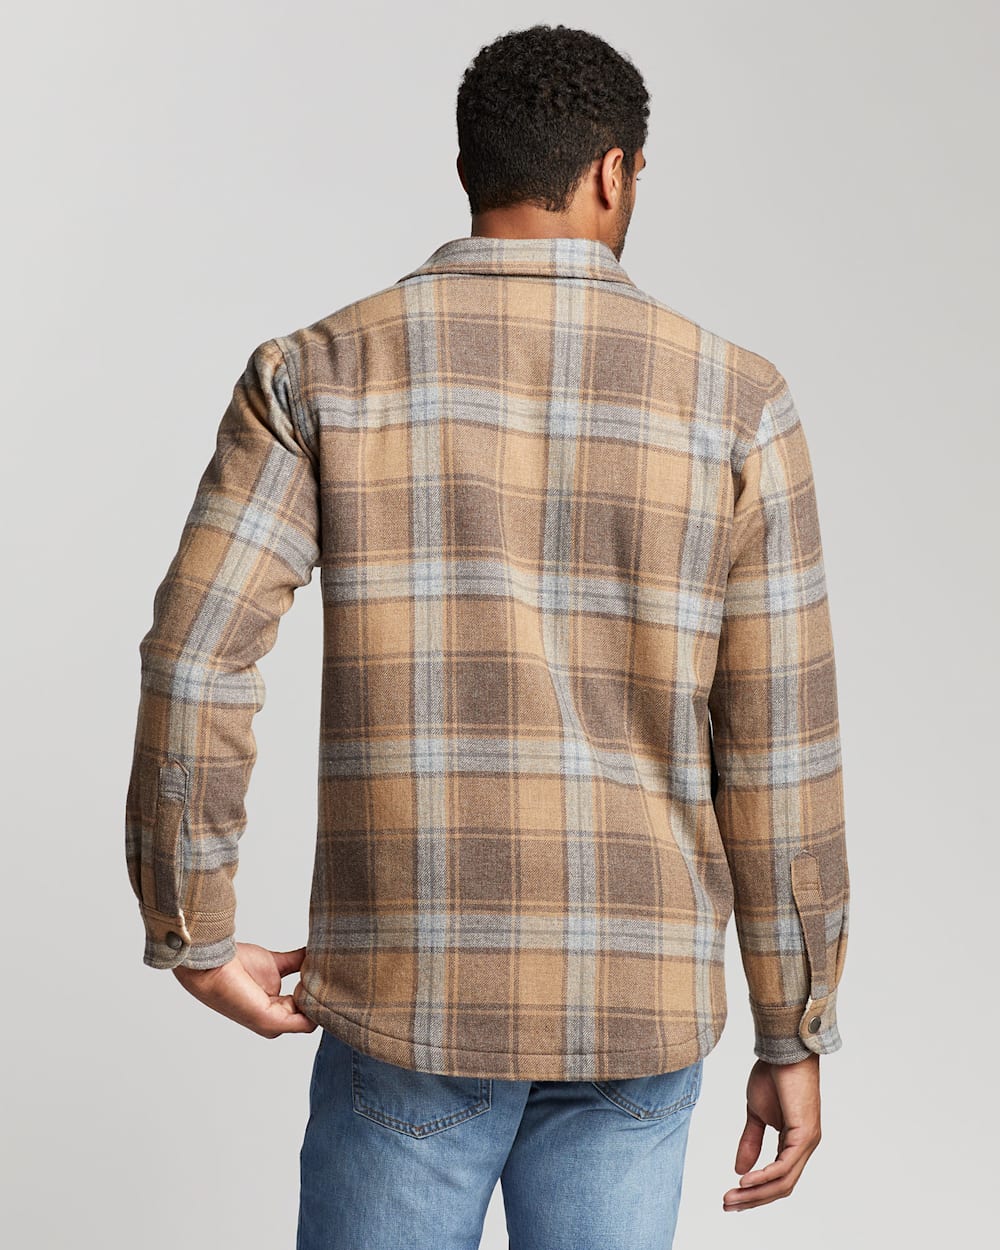 ALTERNATE VIEW OF MEN'S SHERPA-LINED WOOL SHIRT JACKET IN TAN/GREY PLAID image number 3